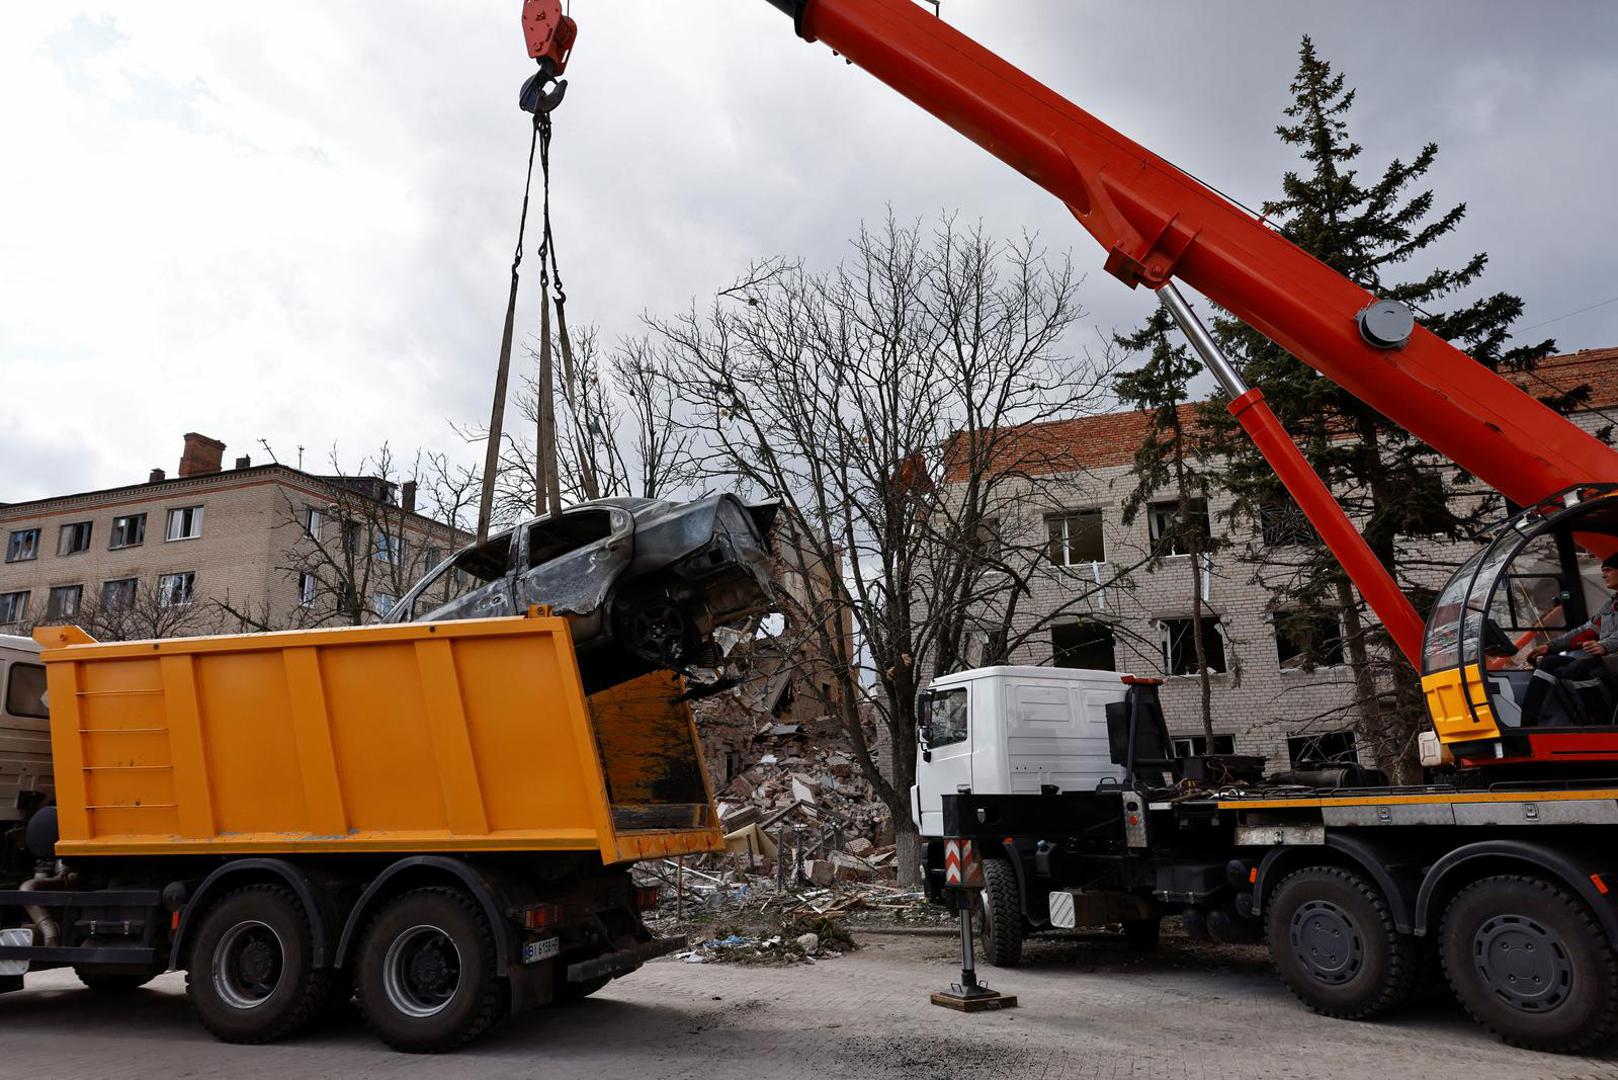 A crane lifts a damaged vehicle in the aftermath of deadly shelling of an army office building, amid Russia's attack, in Sloviansk, Ukraine, March 27, 2023. REUTERS/Violeta Santos Moura Photo: VIOLETA SANTOS MOURA/REUTERS